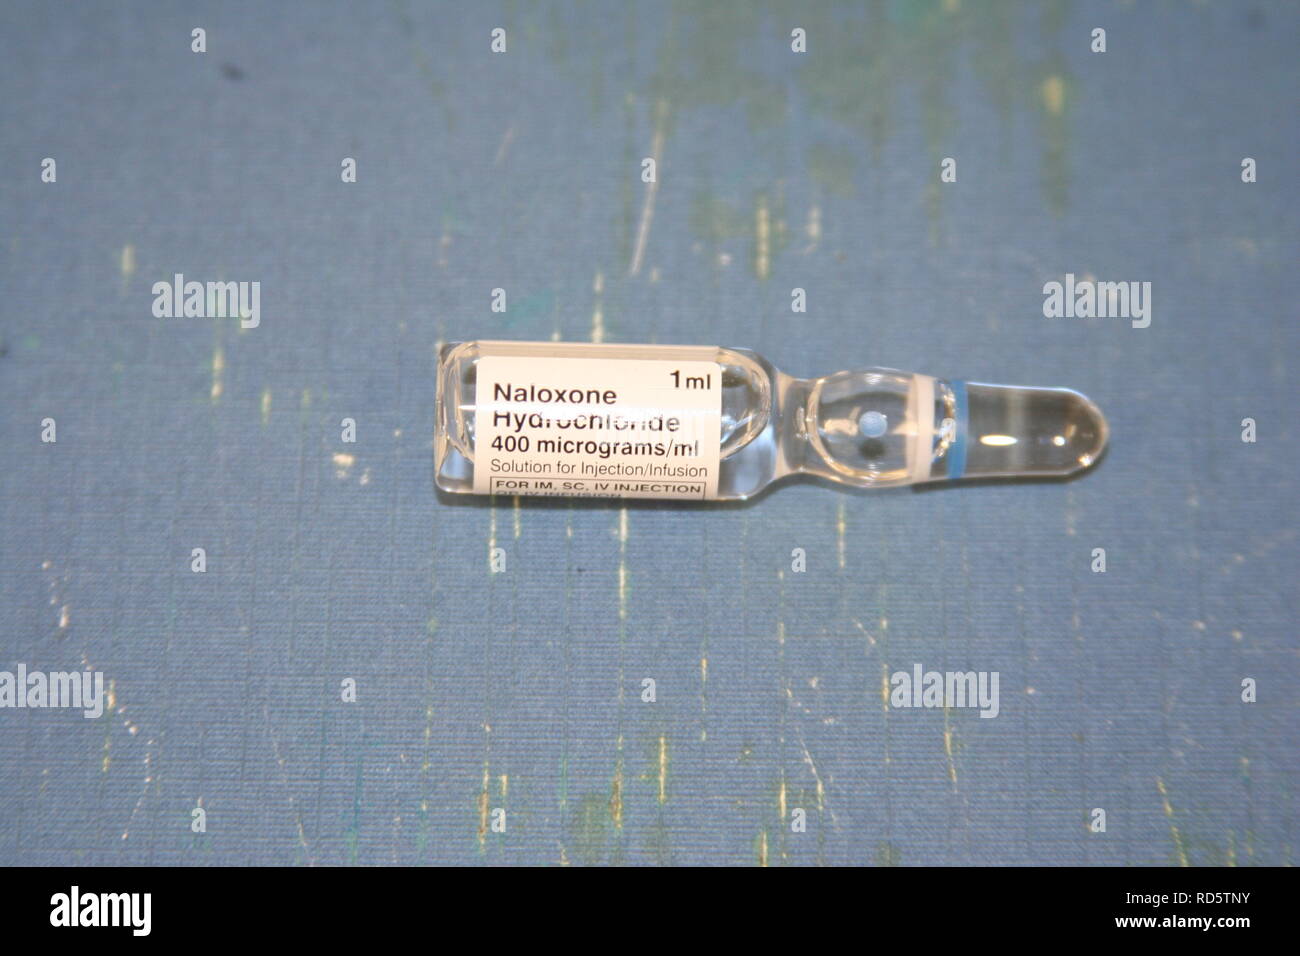 Naloxone injection  400 micrograms in a 1ml ampoule Stock Photo